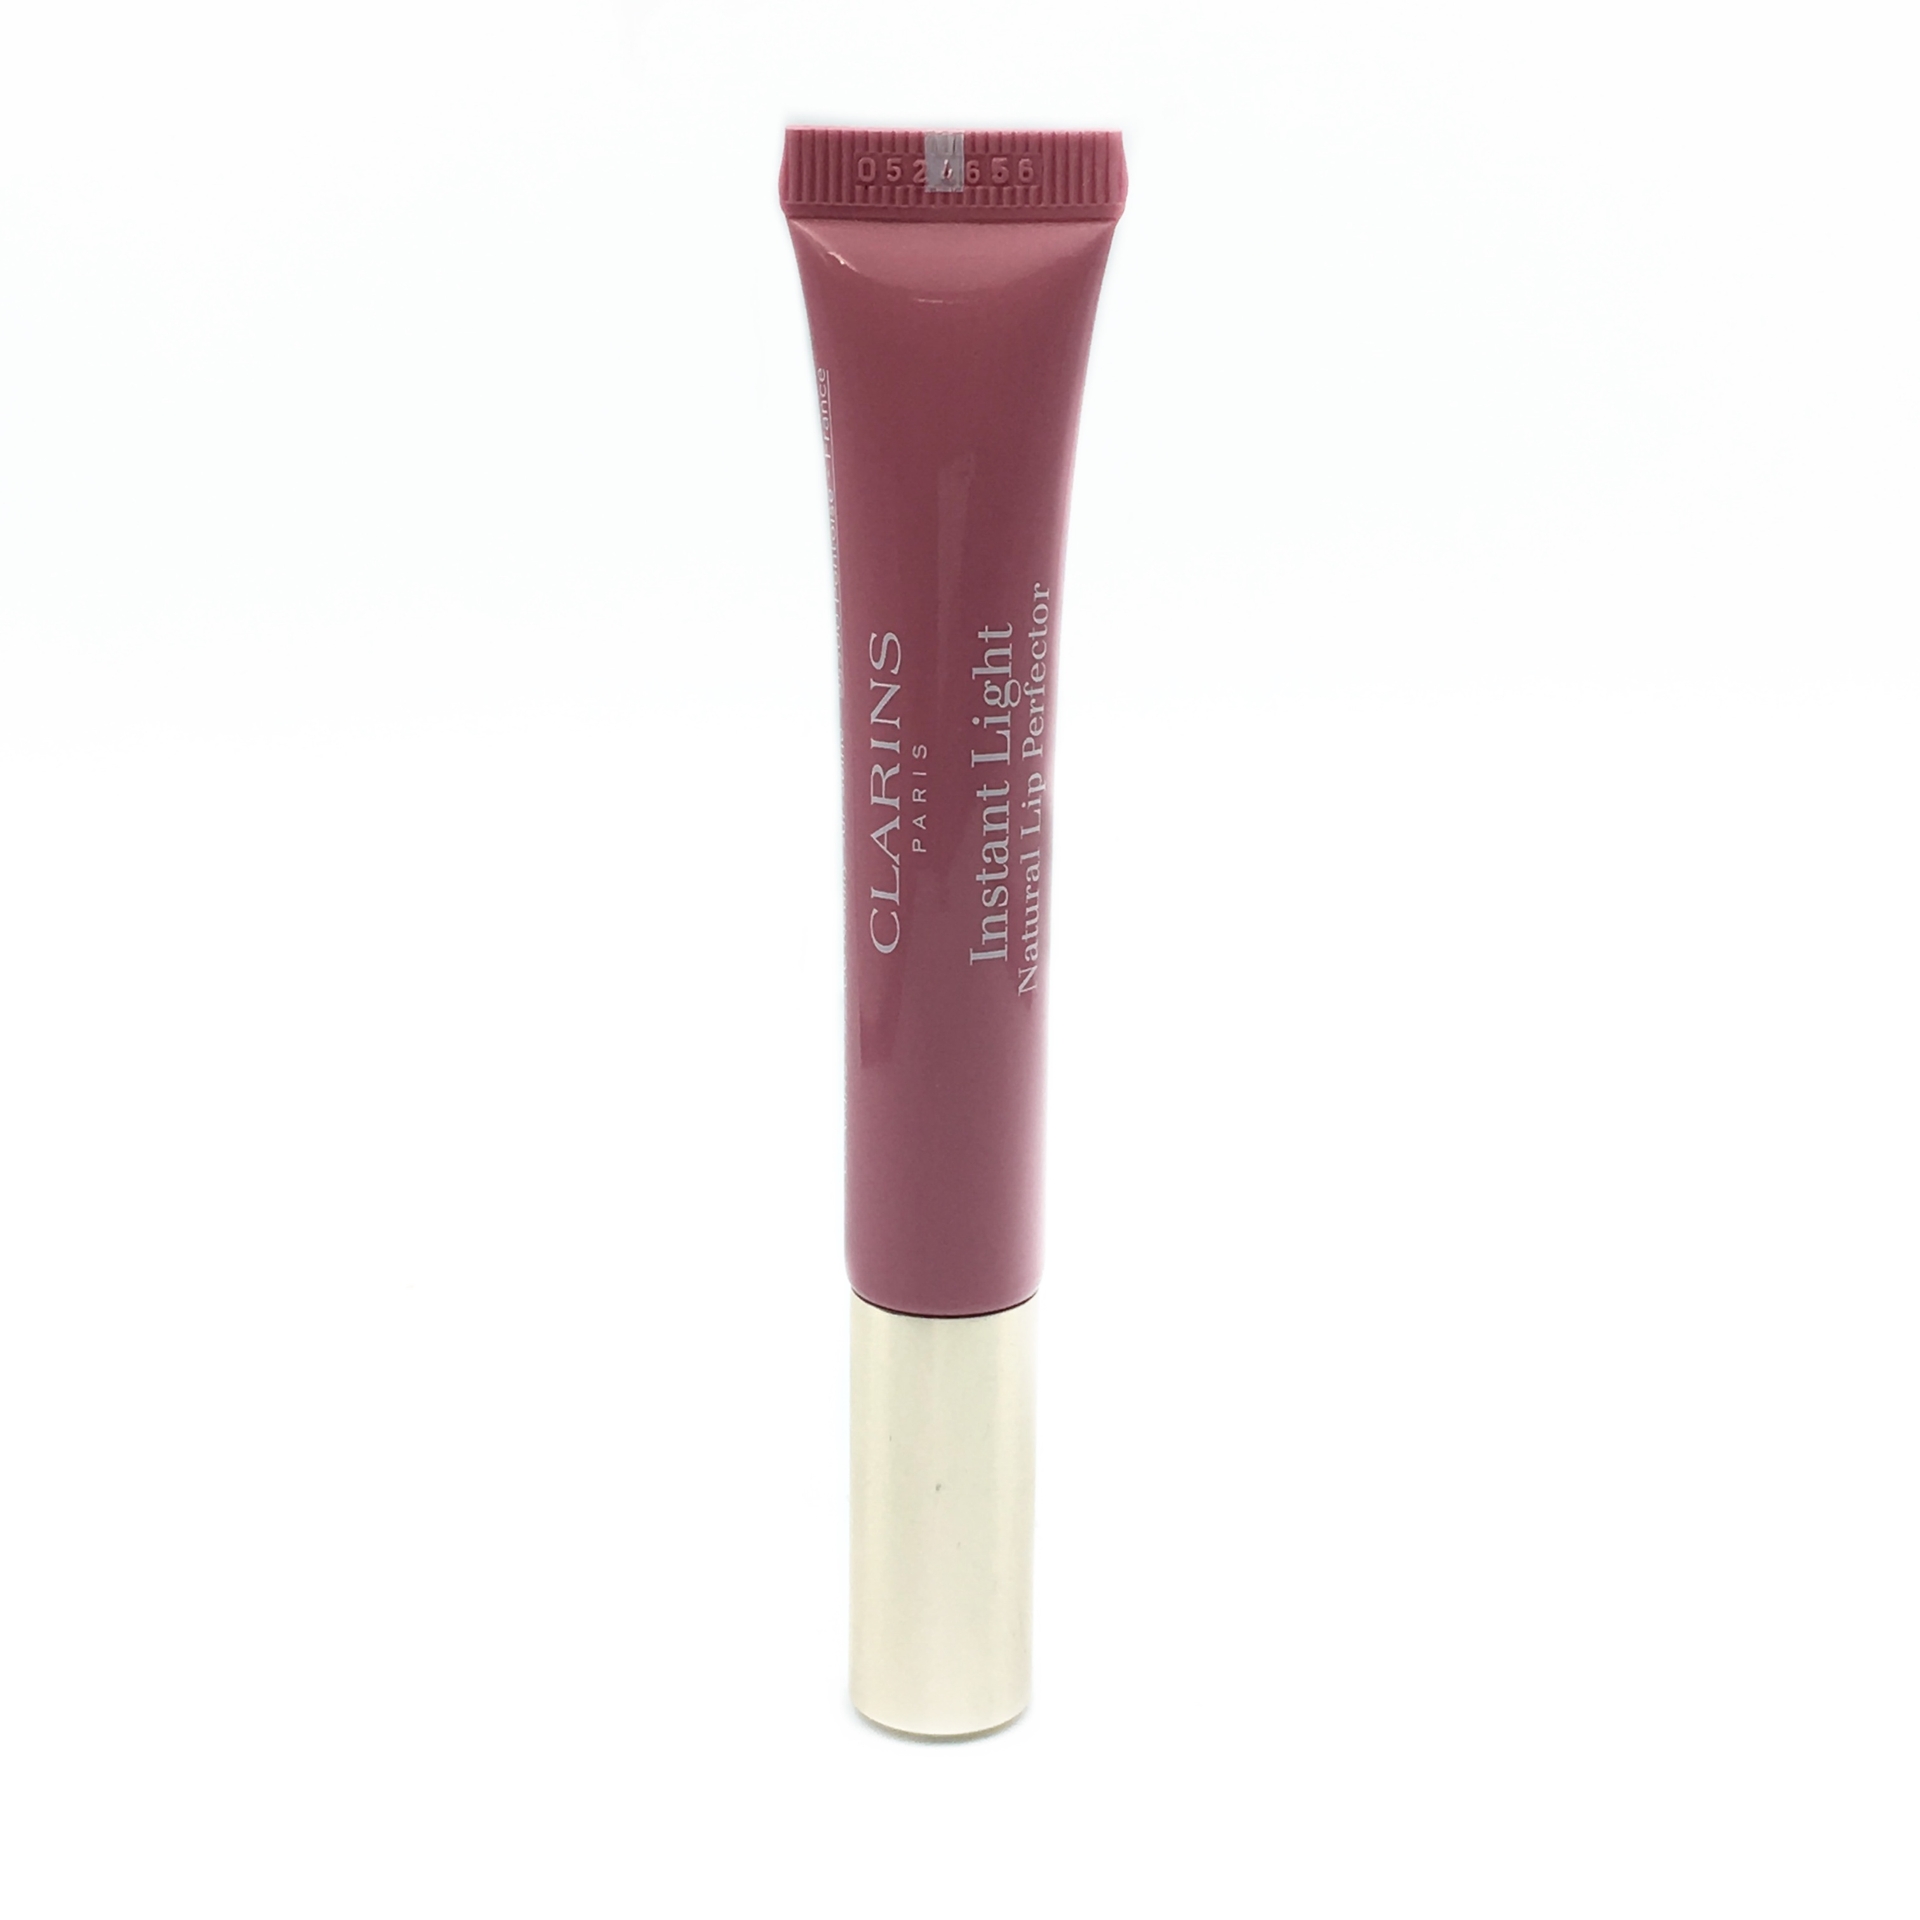 Clarins Instant Light Natural Lip Perfector 07 Lips